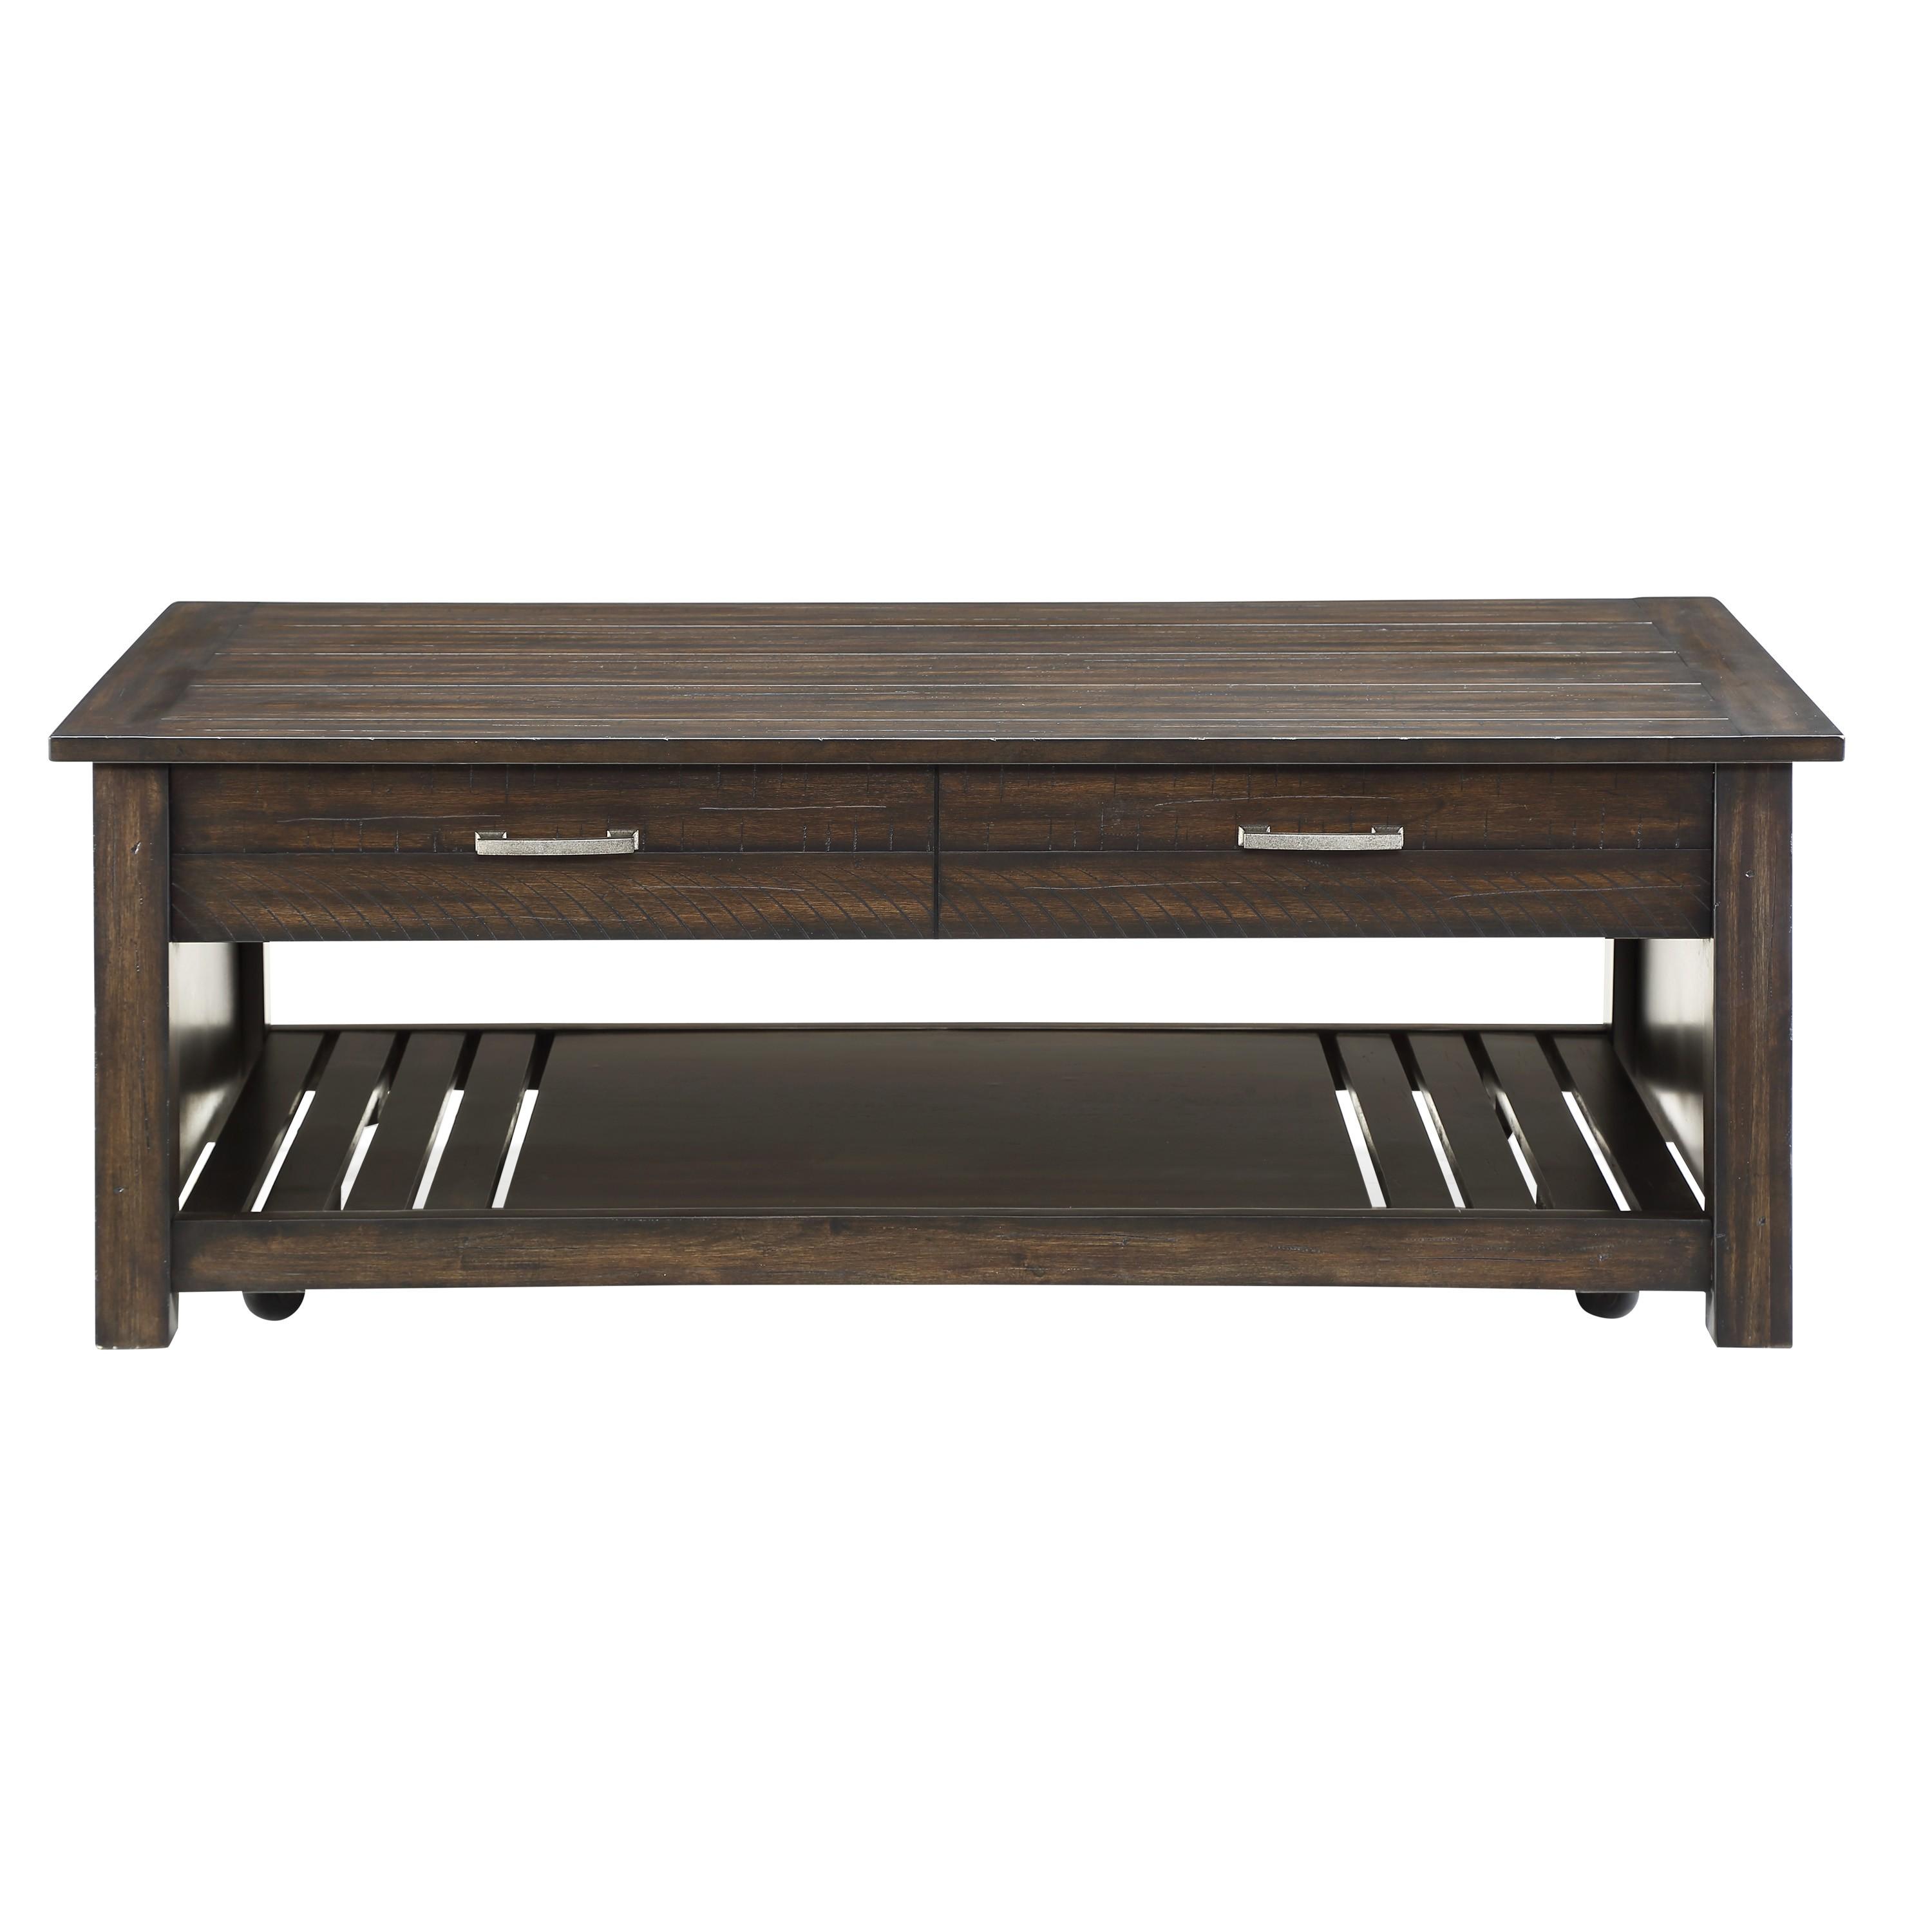 Rustic Cocktail Table 3674-30 Traine 3674-30 in Dark Brown 